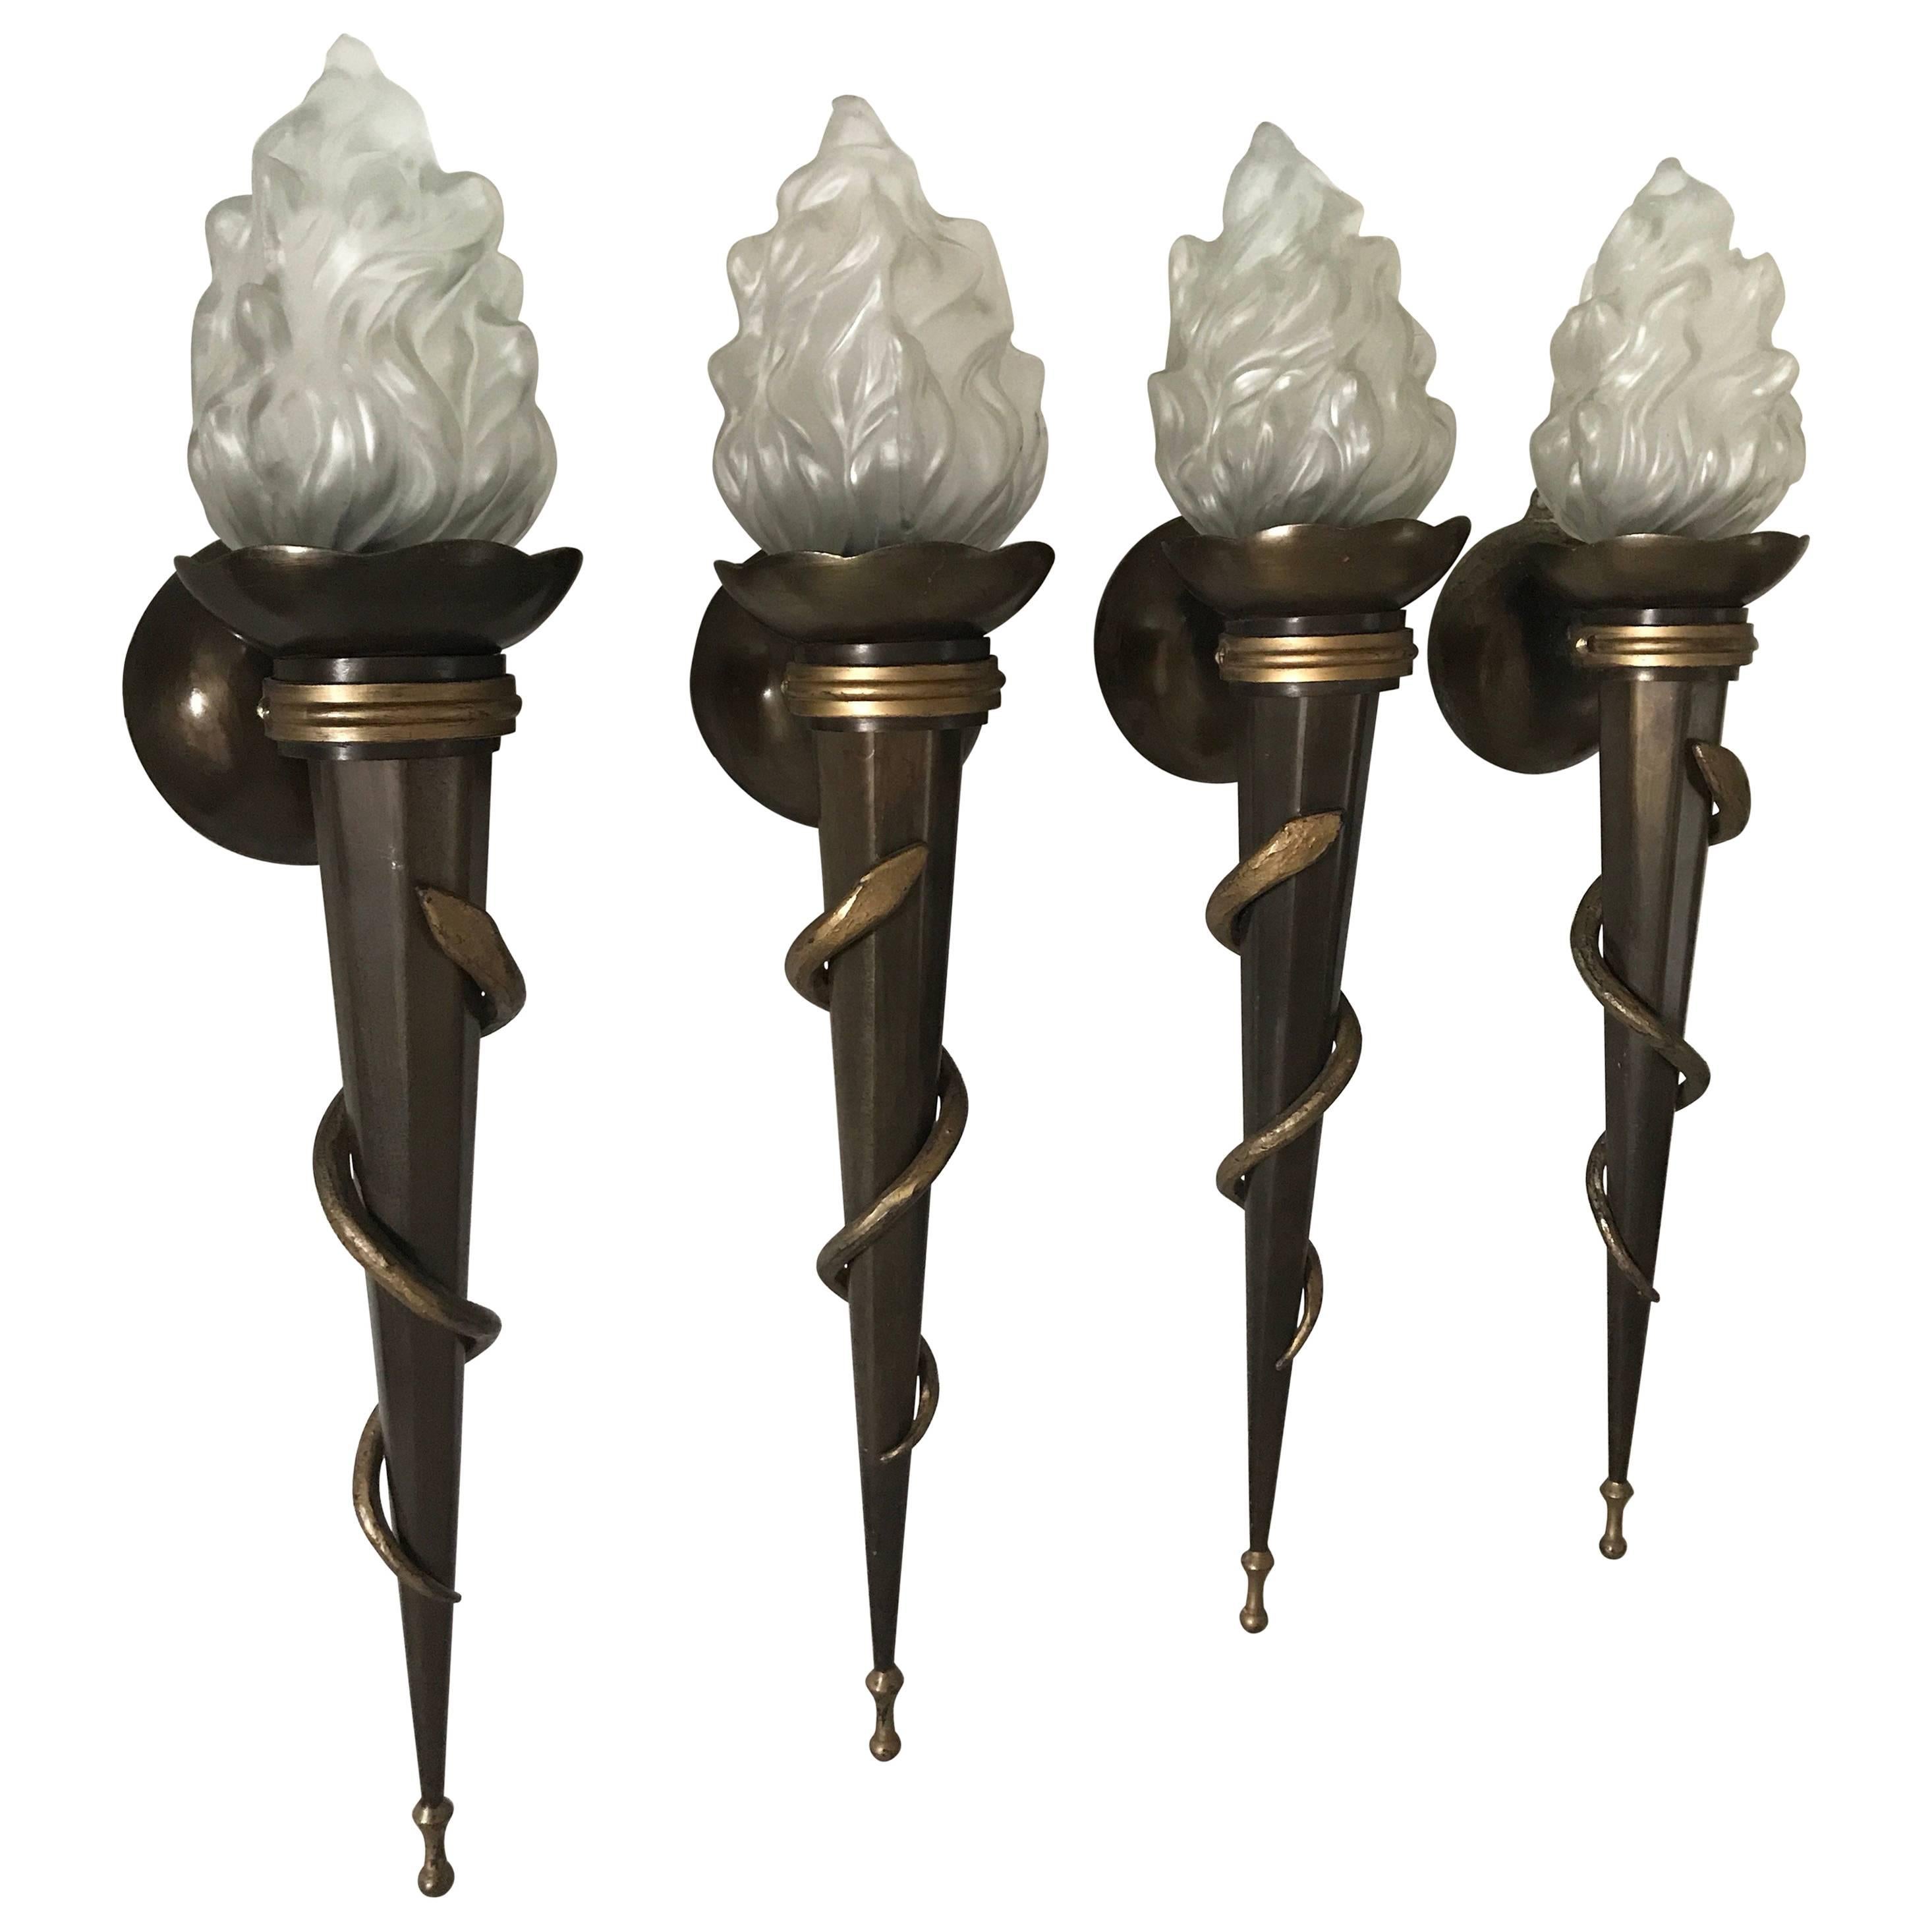 Two Pair of Rare Large Swedish Art Deco Torch Wall Sconces Totally Four Pieces For Sale